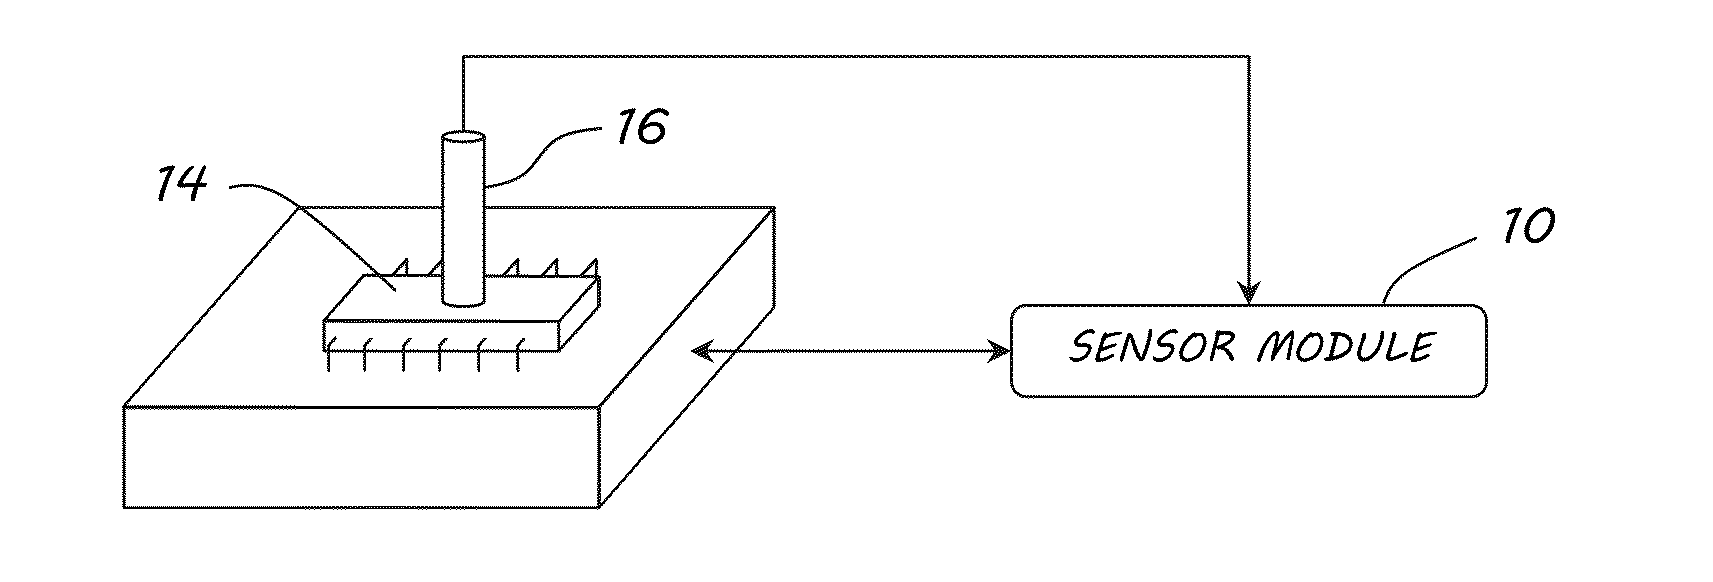 Intrinsic Physical Layer Authentication of Integrated Circuits